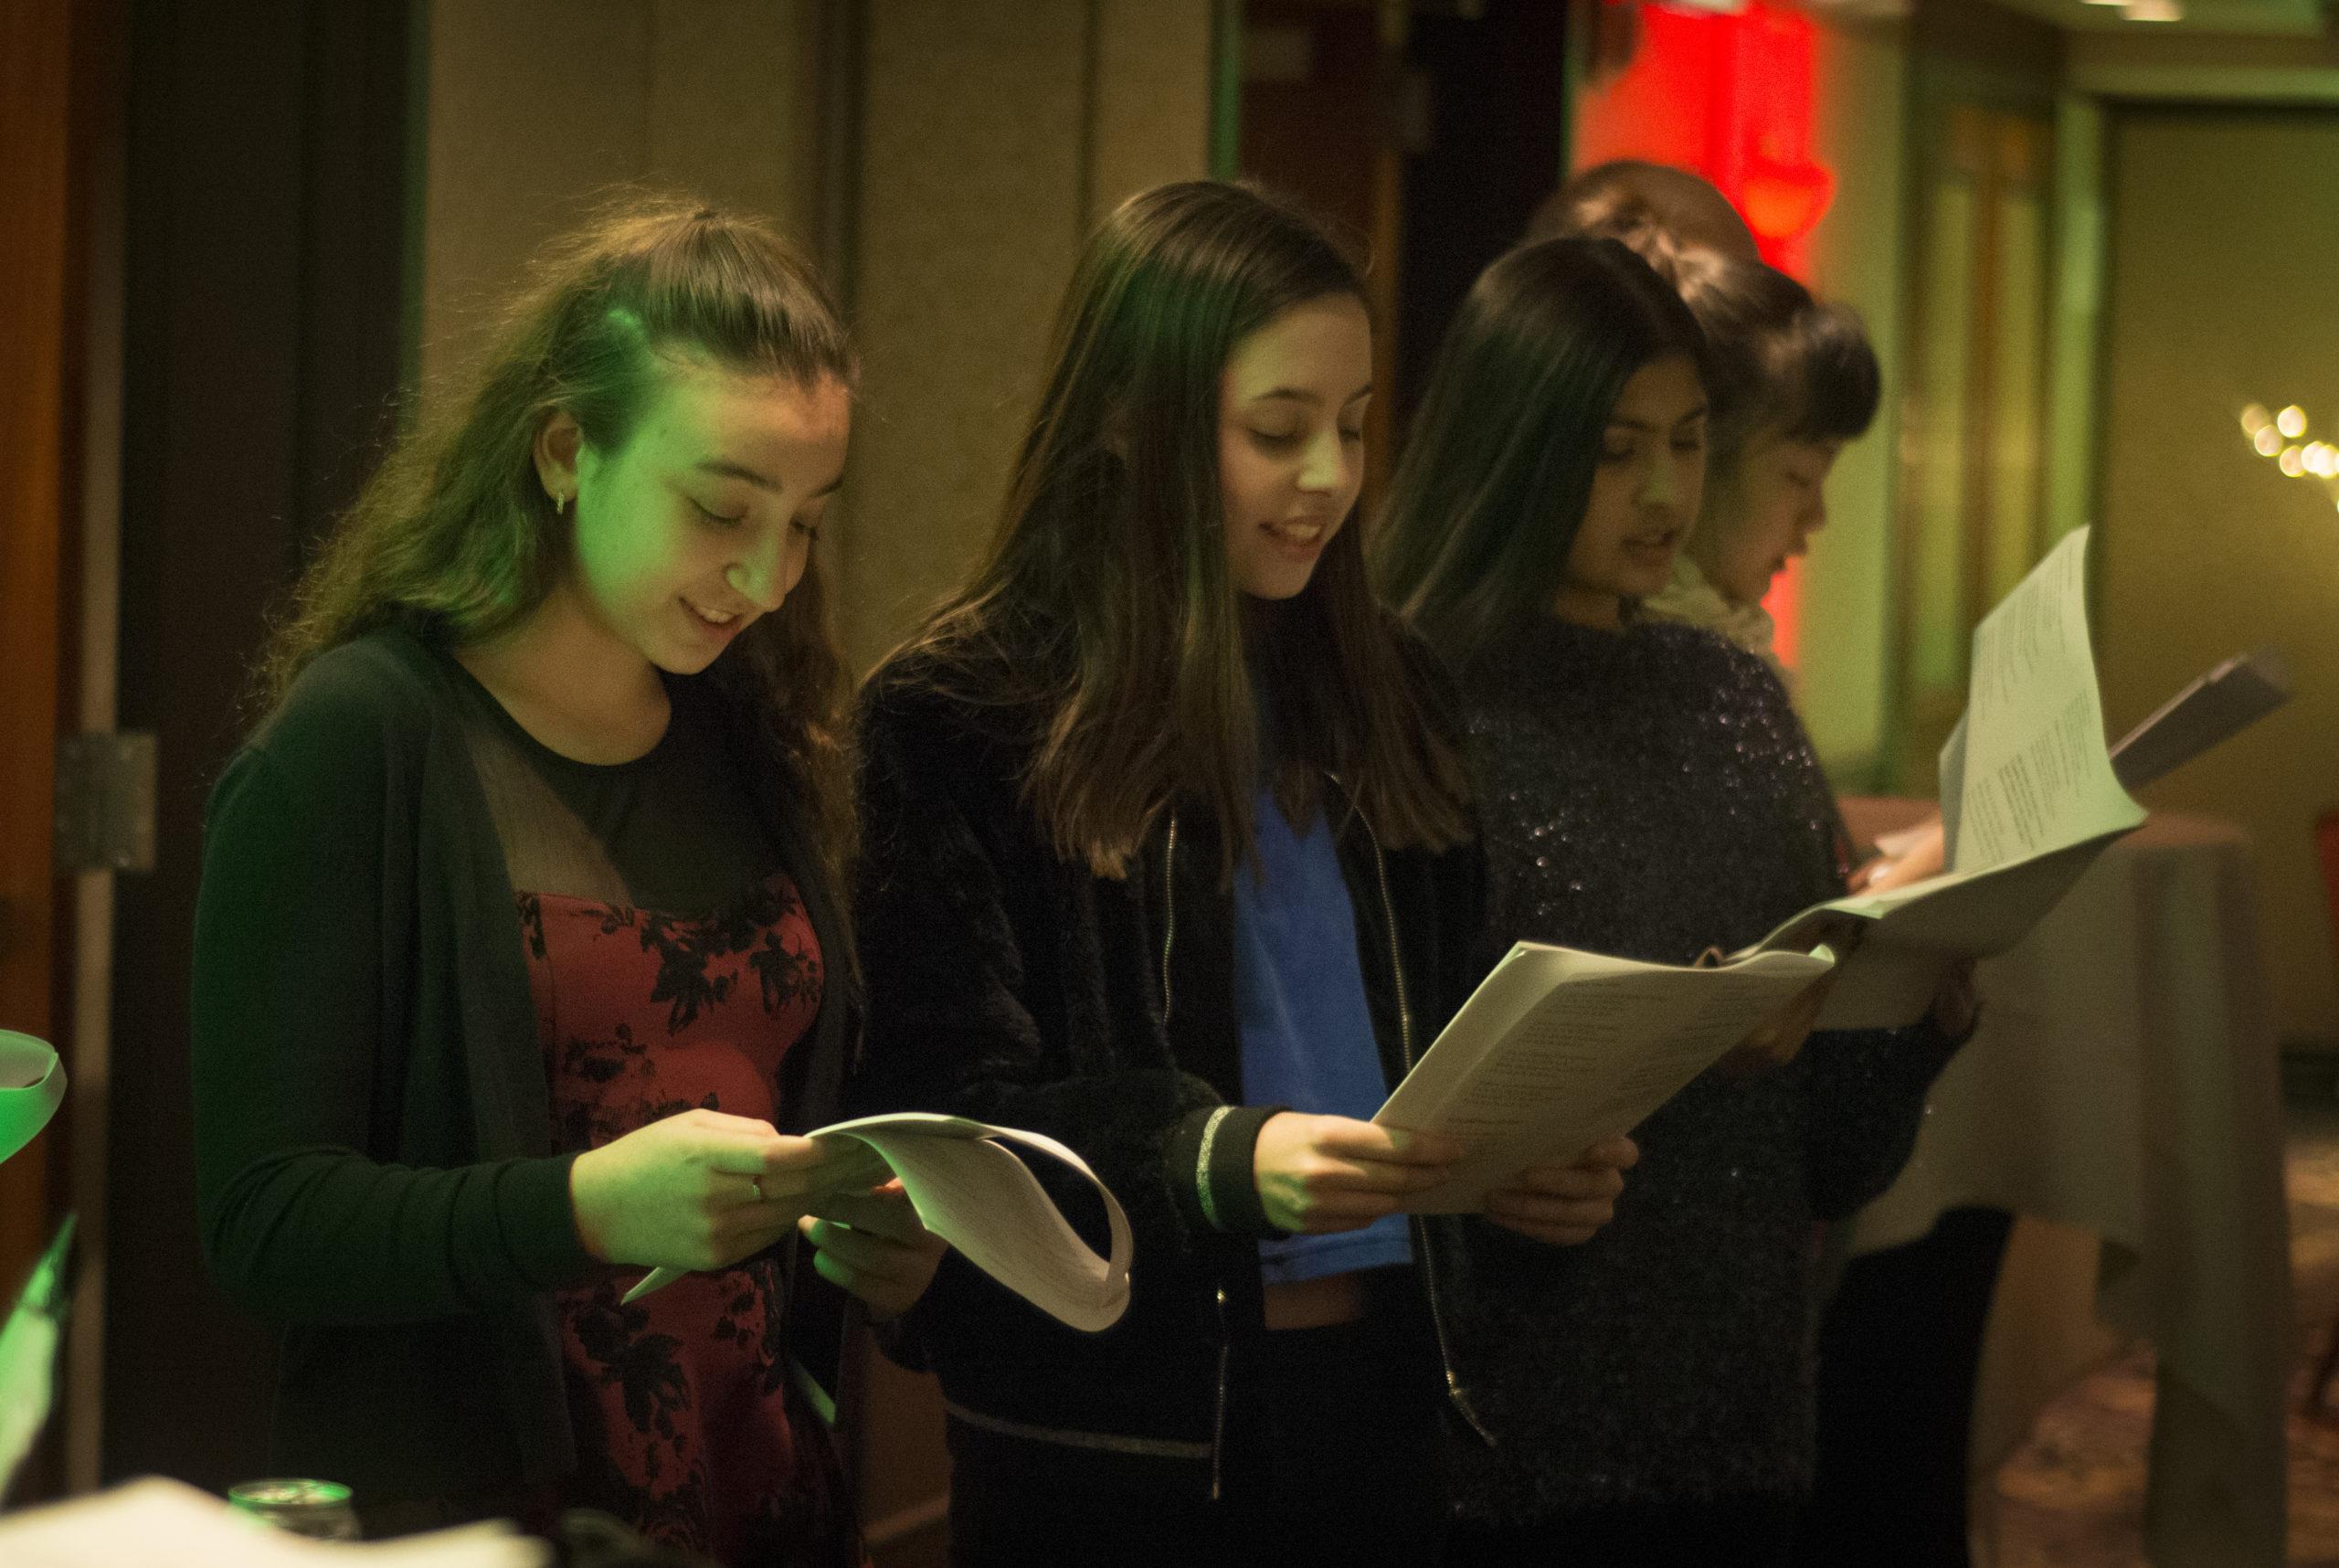 Members of Great Neck High School's choir sang at the Inn at Great Neck's annual Christmas tree lighting party on Wednesday night, a tradition many of them have been involved in since their freshman year. (Photo by Janelle Clausen)